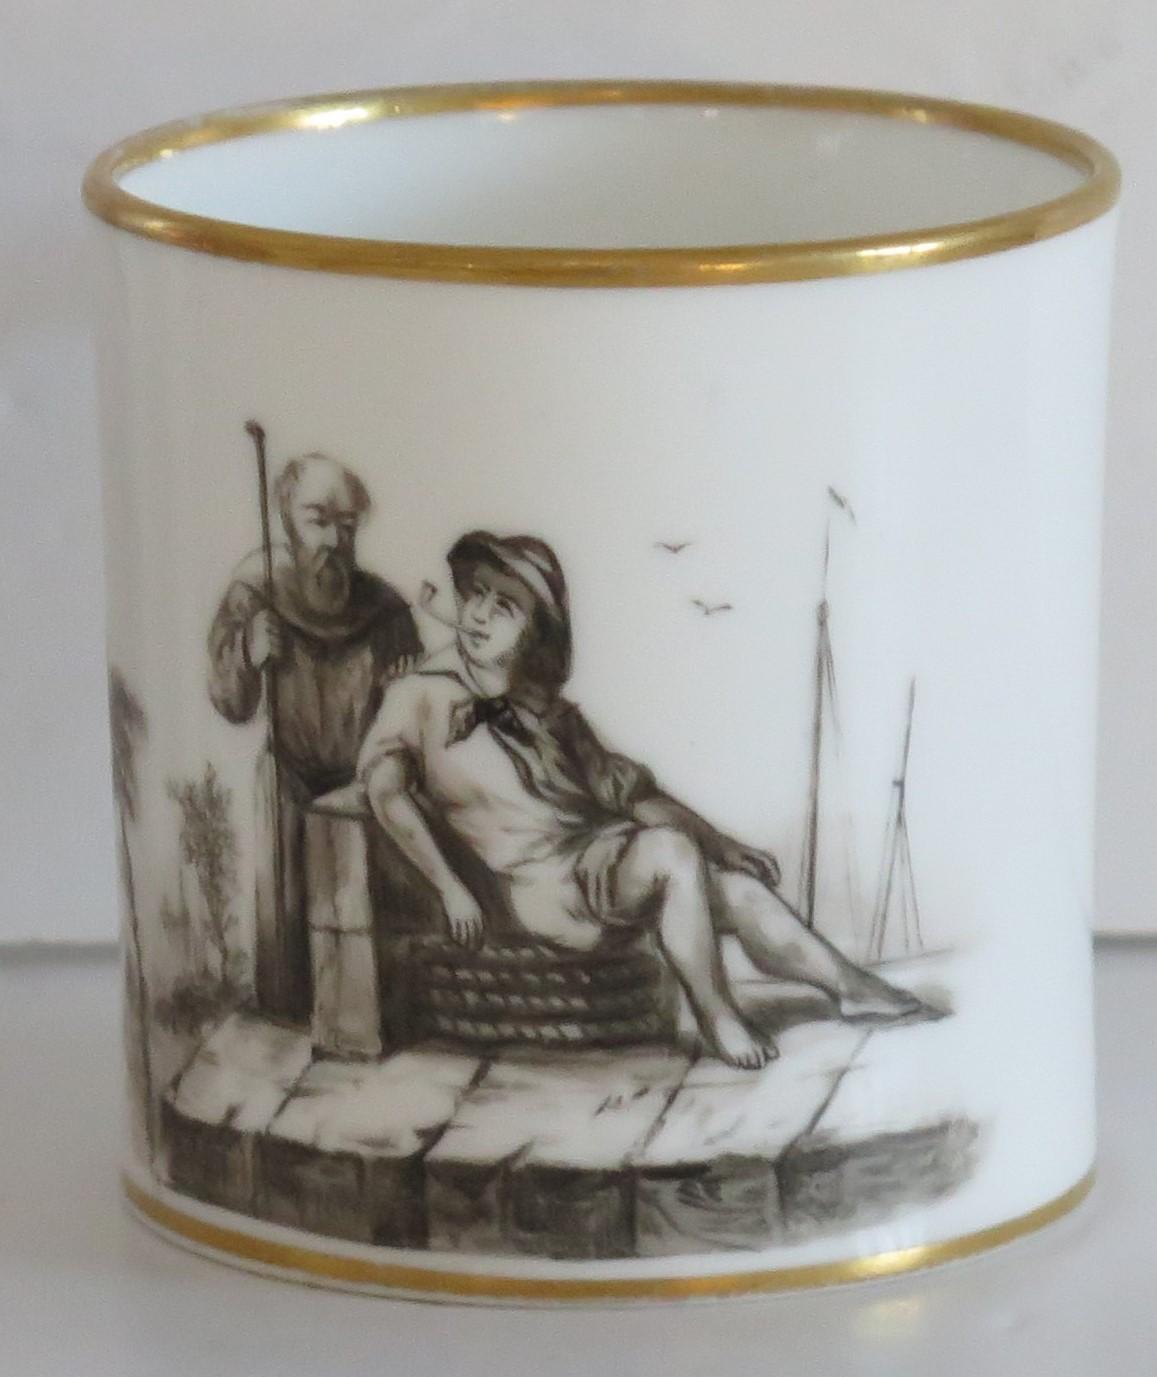 This is a very beautiful porcelain coffee can made by a French Paris maker, dating to the early 19th century, circa 1810.

The very fine Paris Porcelain coffee can, which is very well painted 